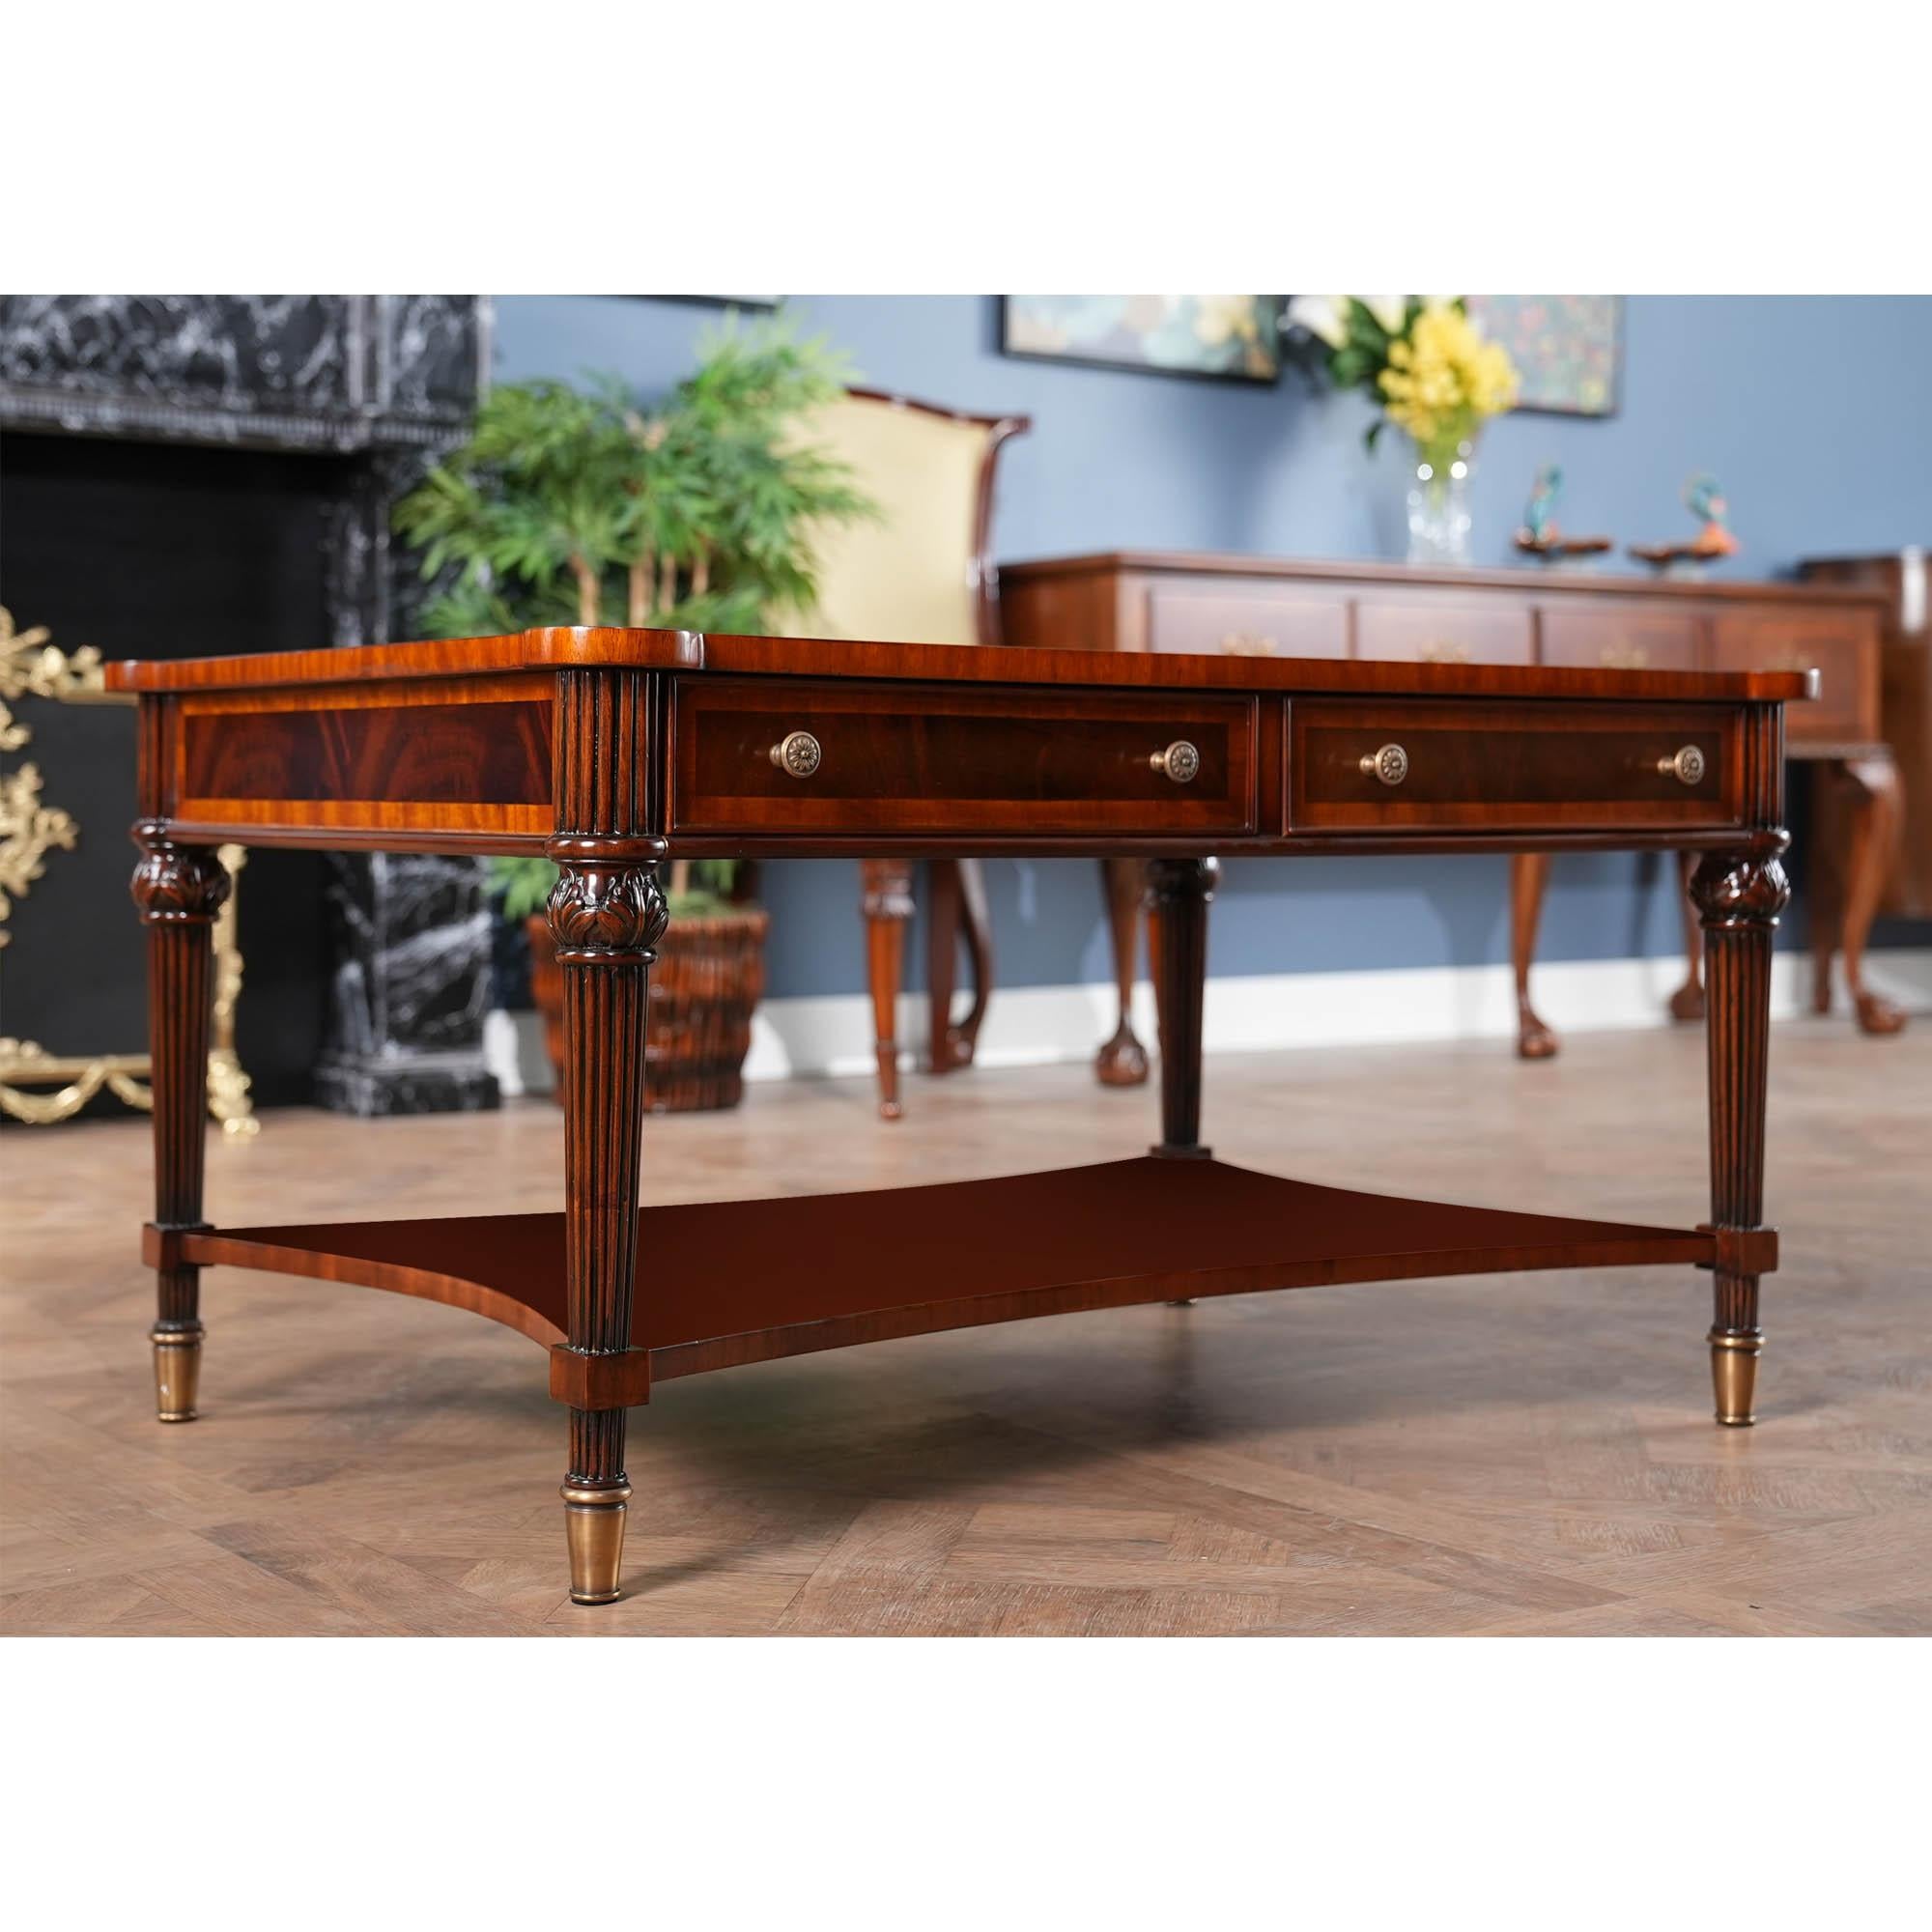 Rectangular Mahogany Coffee Table In New Condition For Sale In Annville, PA